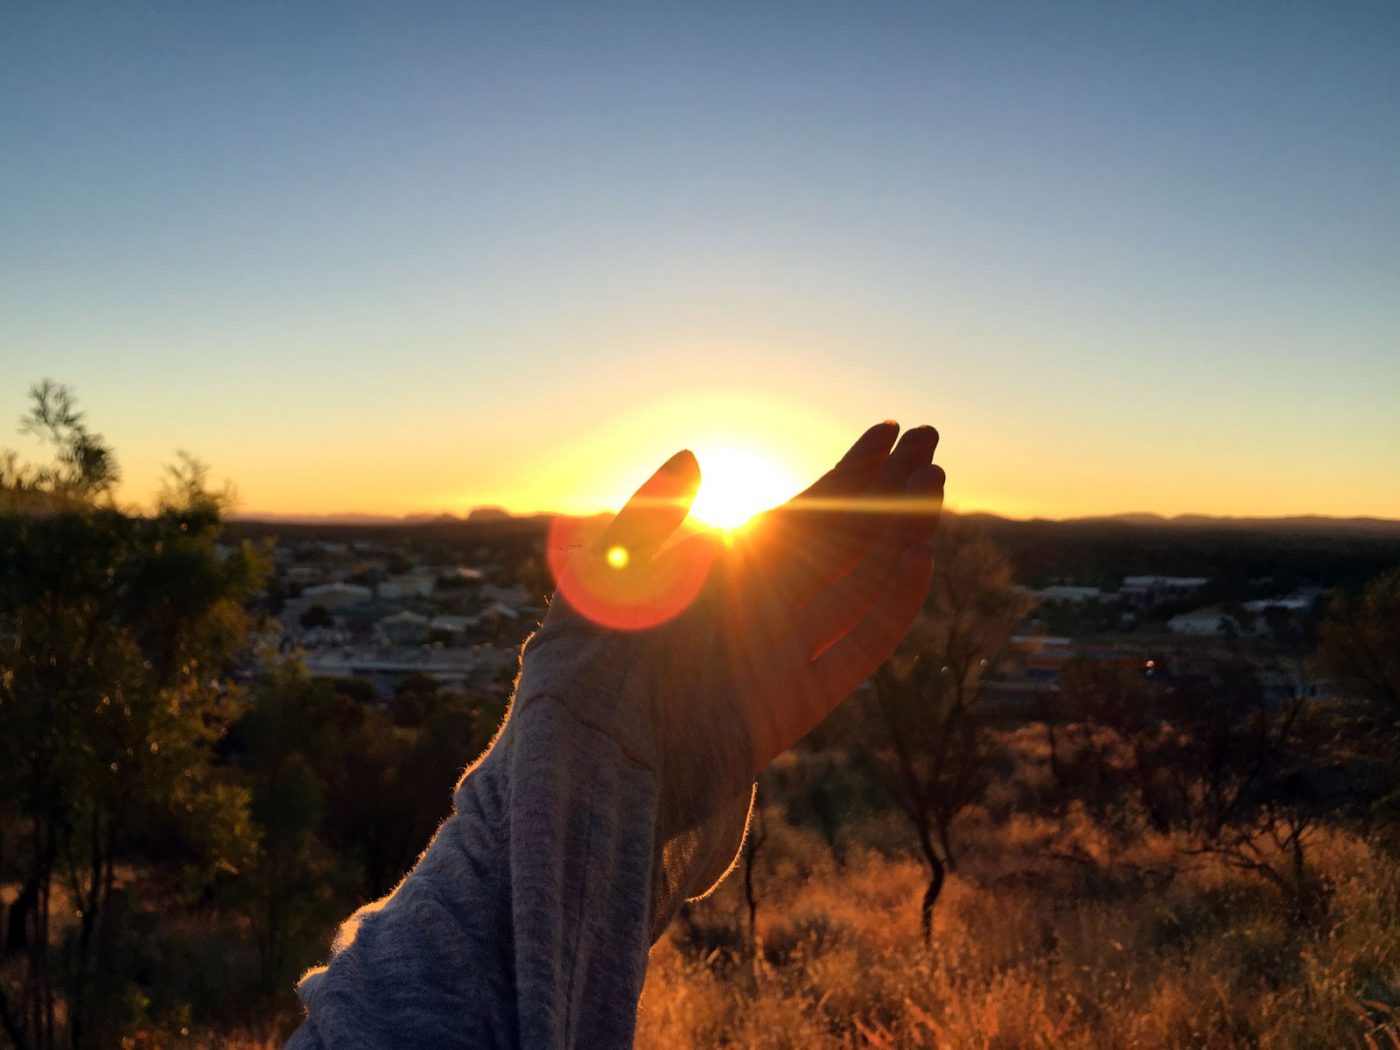 Catching sunset in Alice Springs